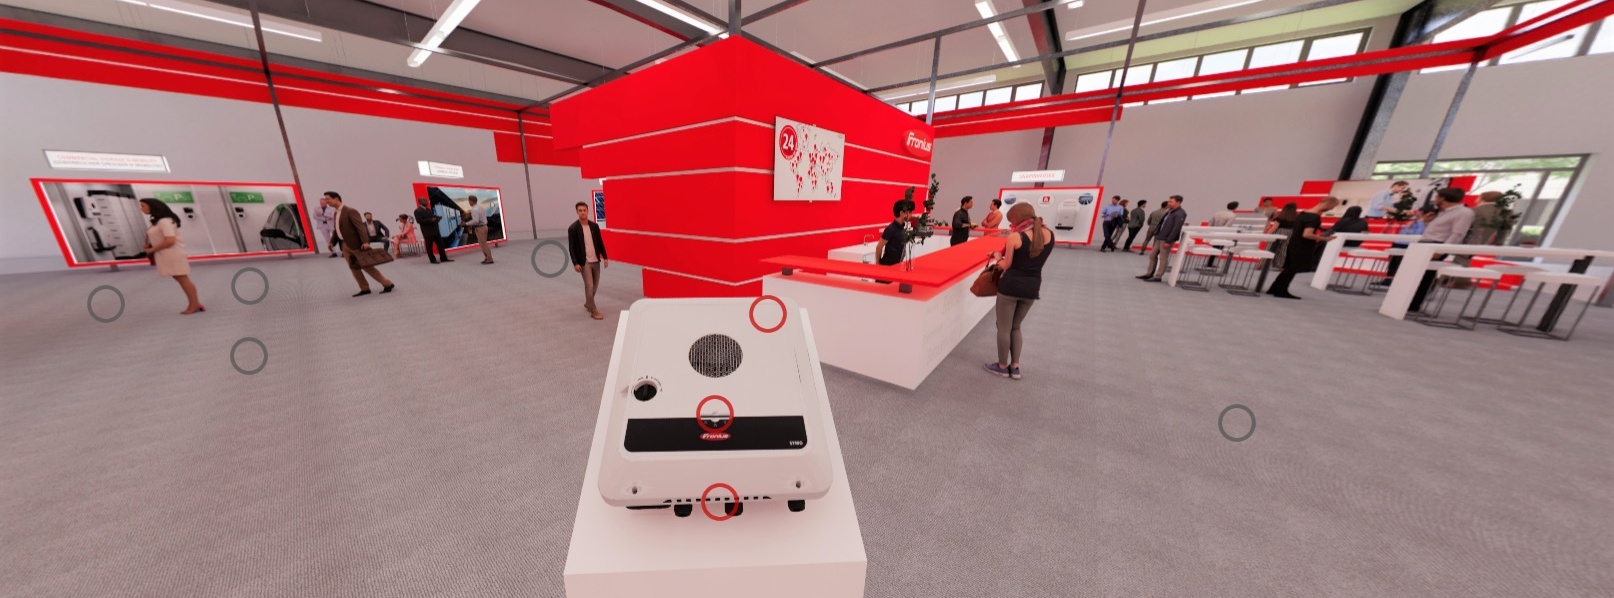 Stand virtuale Fronius